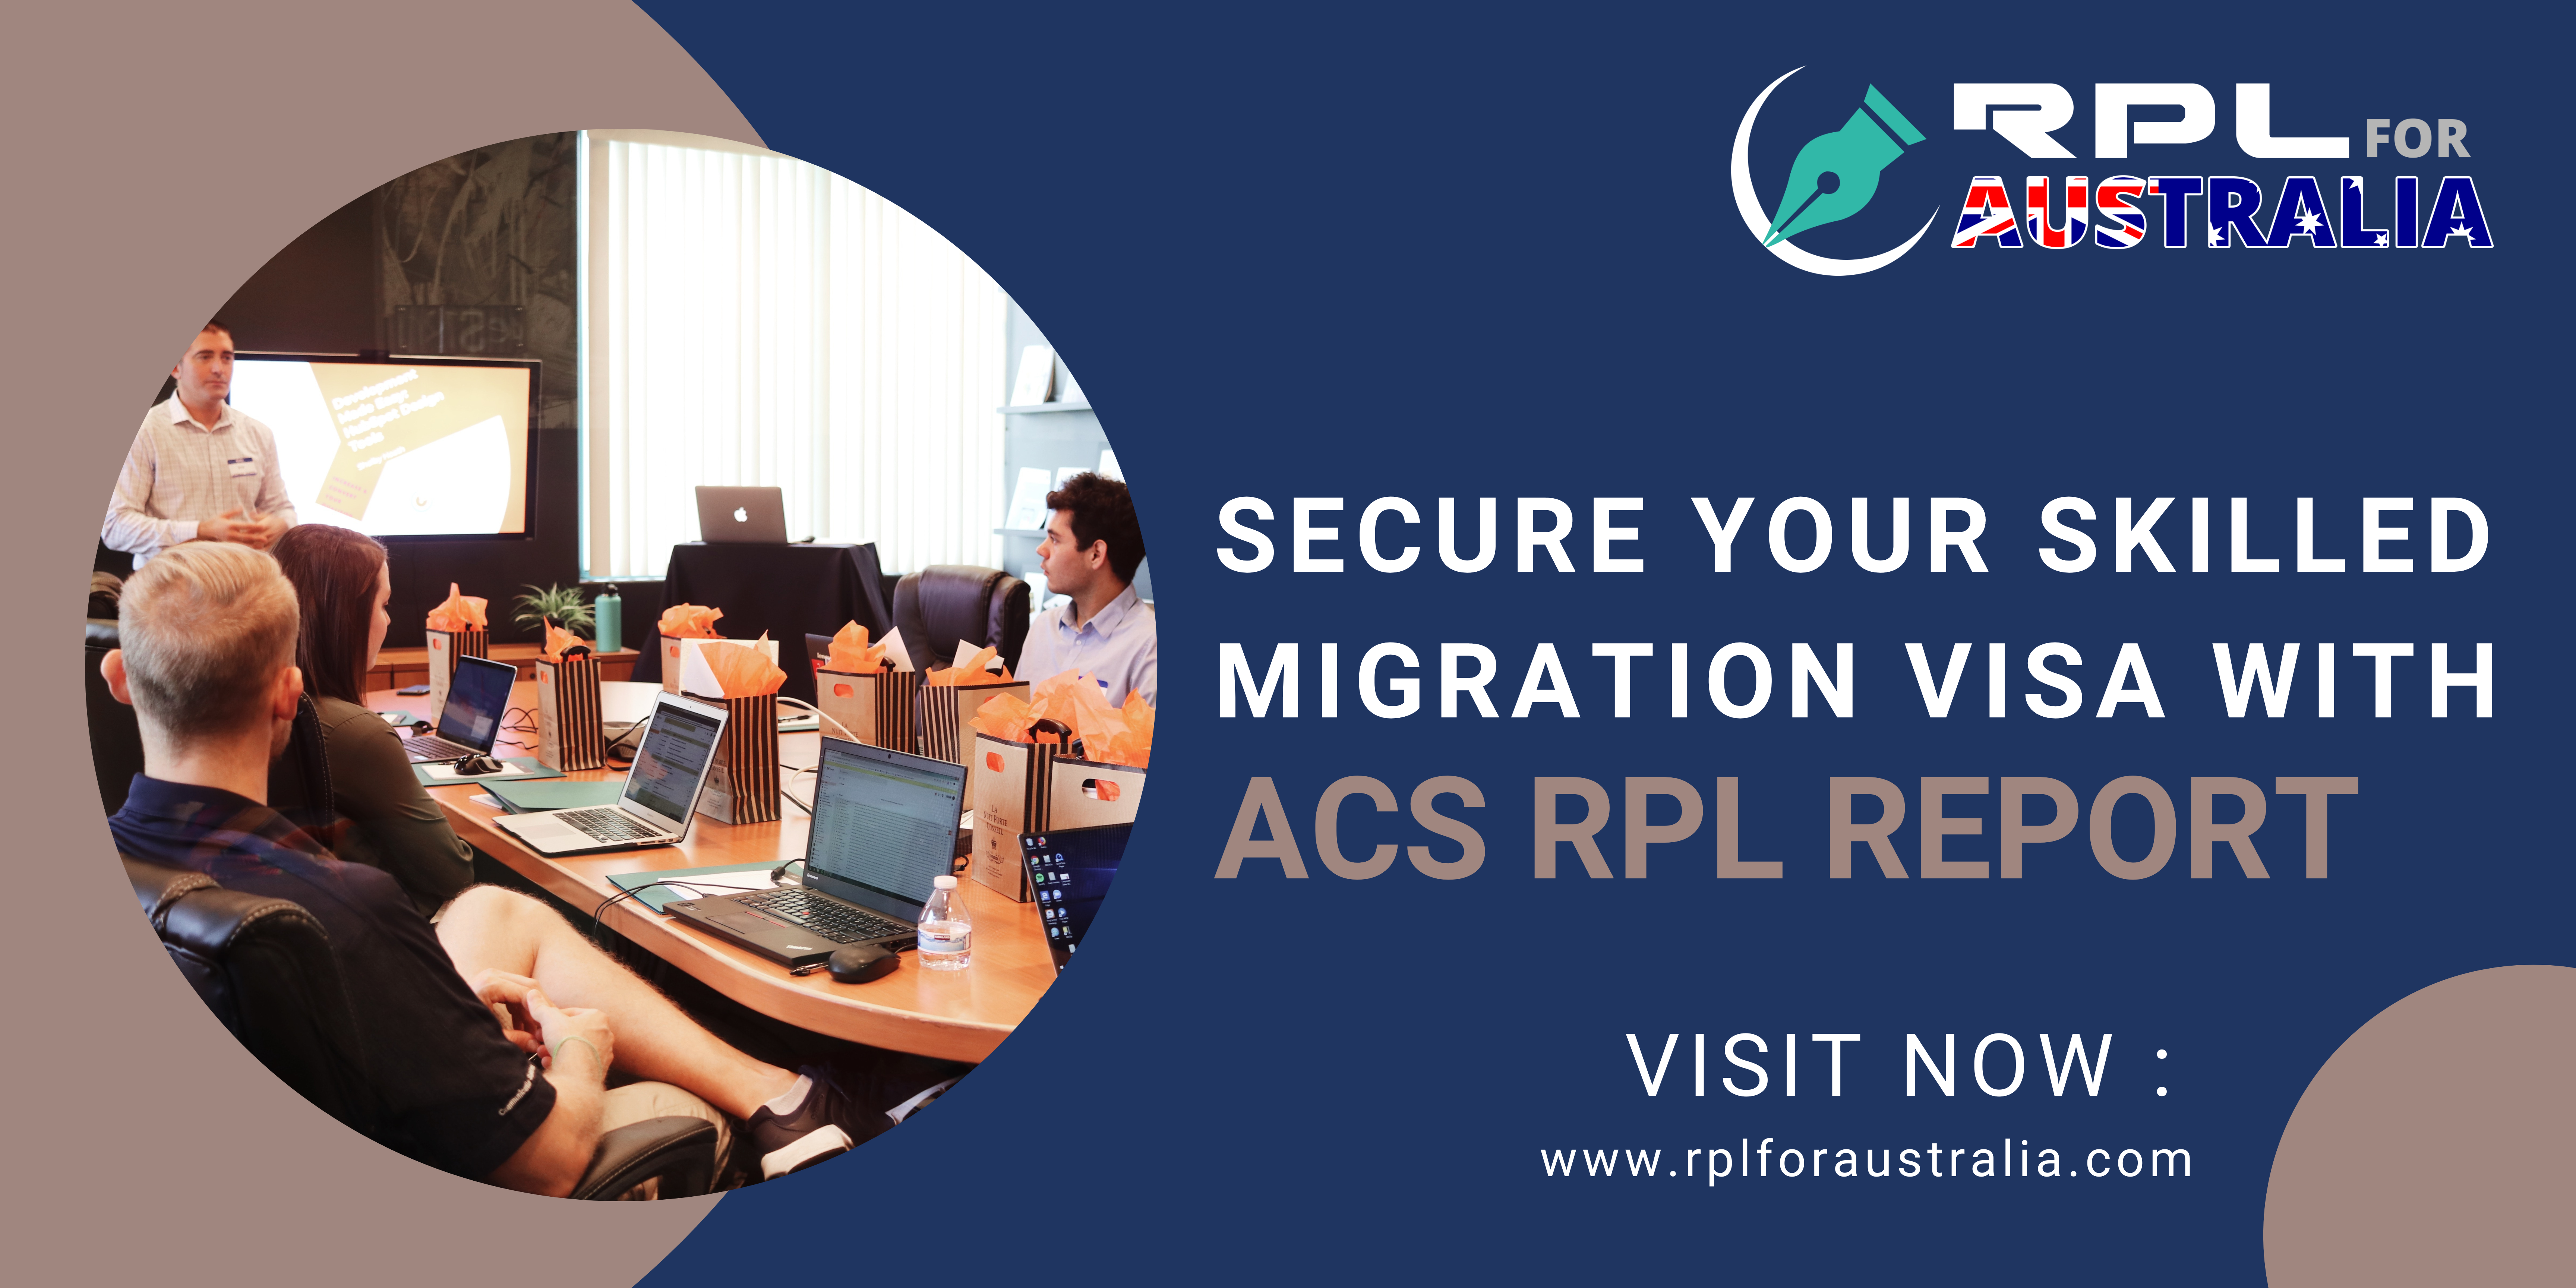 Secure Your Skilled Migration Visa with ACS RPL Report